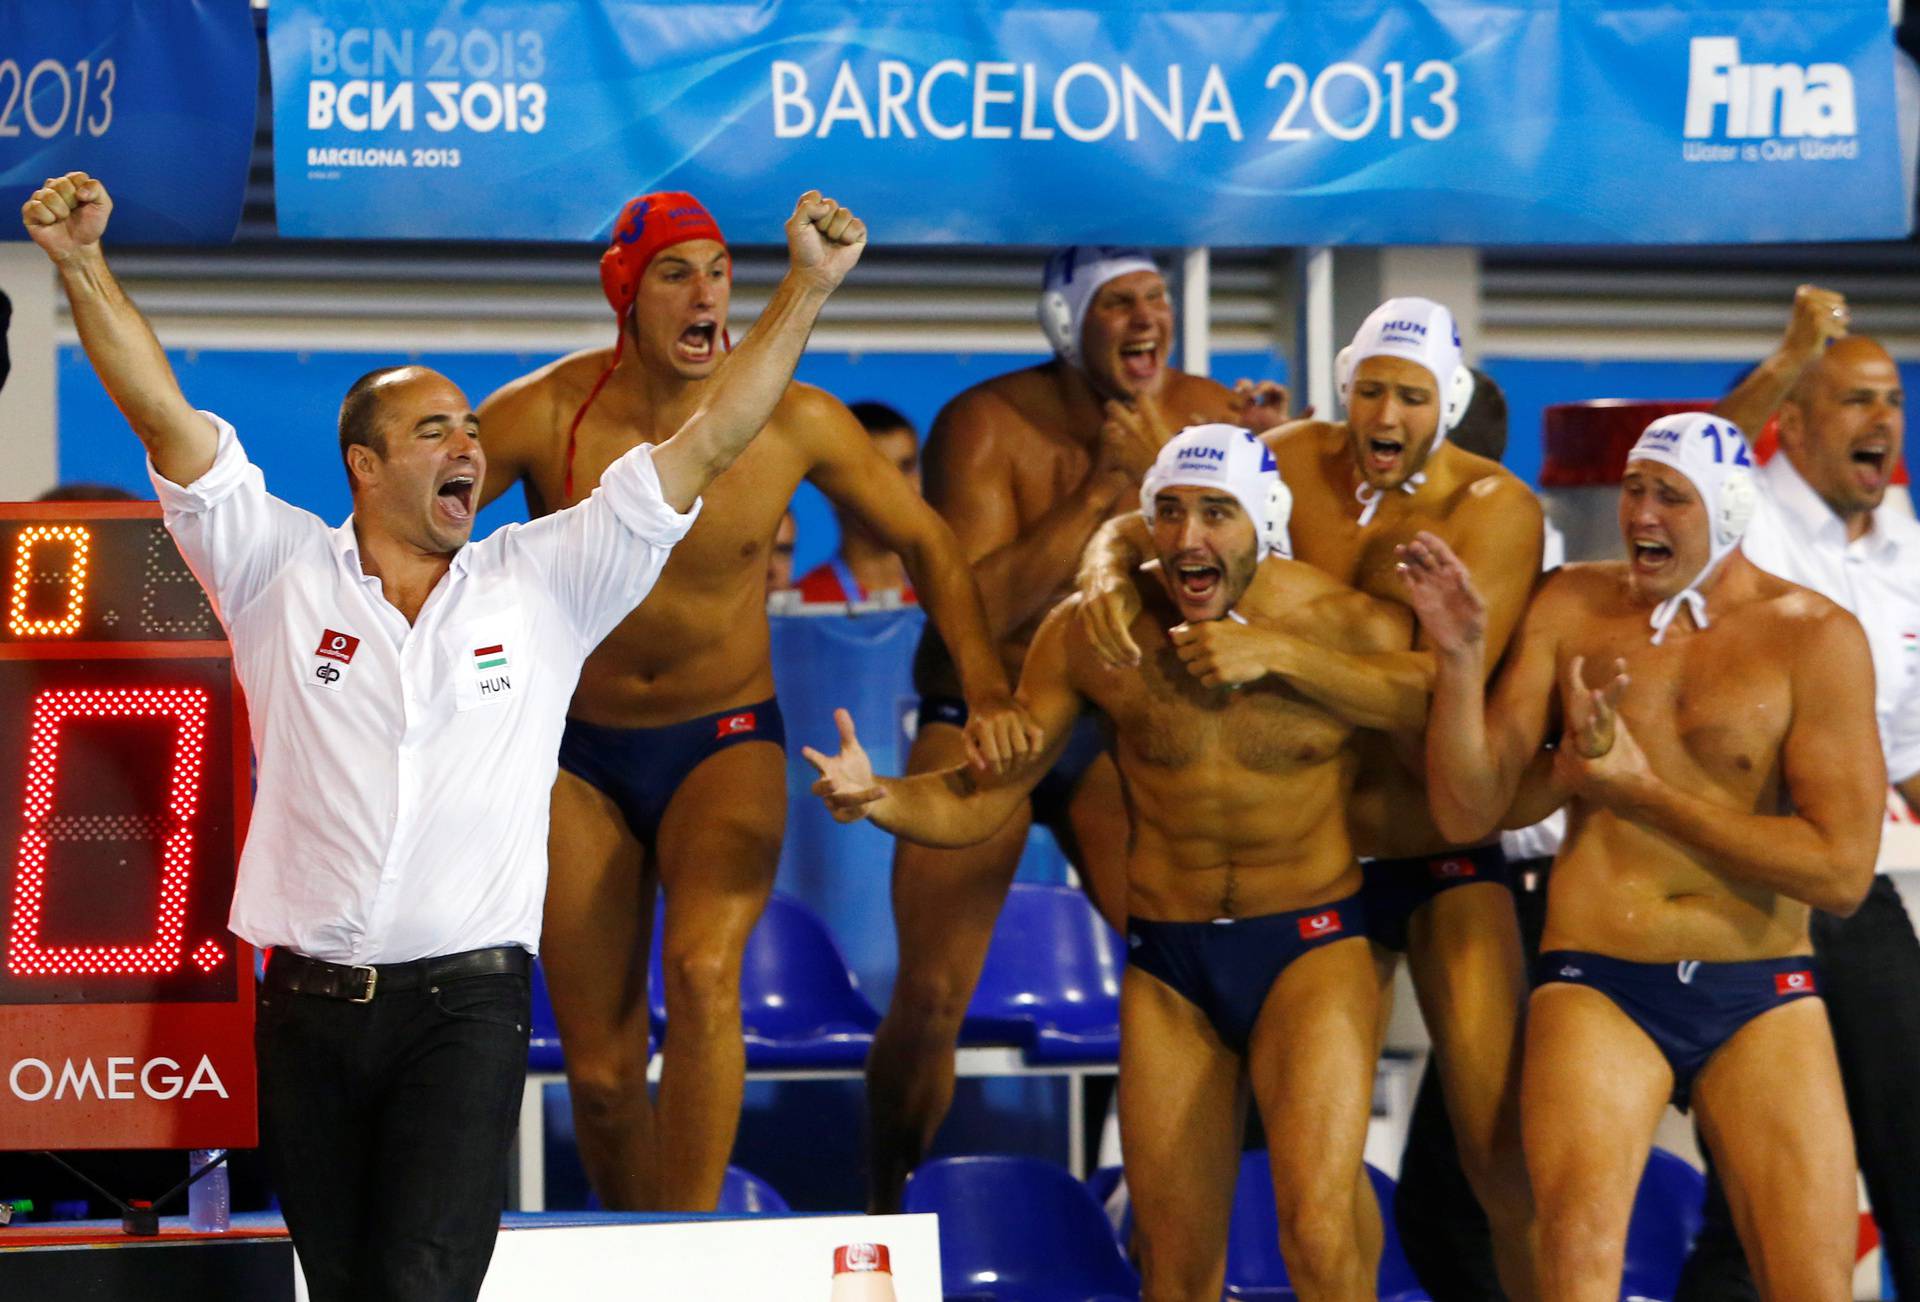 FILE PHOTO: Hungary's head coach Benedek and his players celebrate after winning against Montenegro at their men's water polo gold medal match during the World Swimming Championships in Barcelona